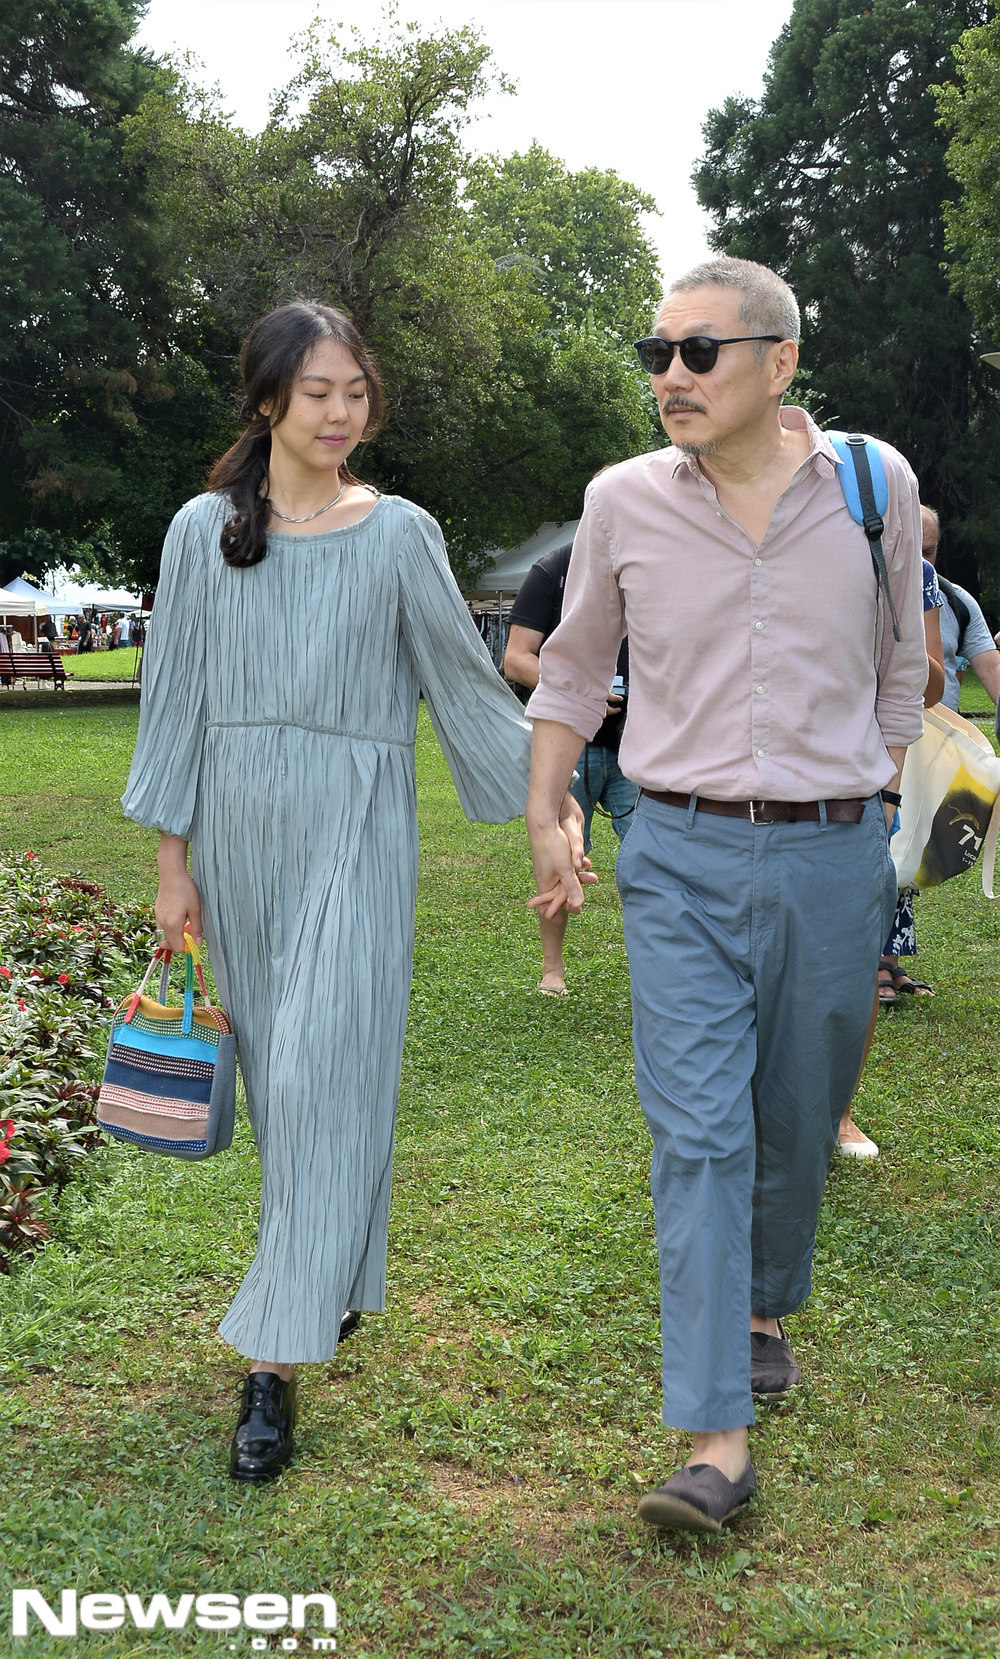 Hong Sangsoo and Actor Kim Min-hee, who have been embroiled in the recent Affair controversy, were spotted in Switzerland.According to United States of America Splash.com on August 9 (local time), the Hong Sangsoo and Kim Min-hee couple attended the 71st Locarno International Film Festival 2018 in Locarno, Switzerland.The two people gathered their eyes with a friendly appearance, such as appearing in front of the reporters.The movie Riverside Hotel directed by Hong Sangsoo and starring Kim Min-hee was the only Korean film to be invited to the competition at the Locarno International Film Festival.The domestic release date is not yet known. It depicts the story of a middle-aged man, his children, and two young women.hwang hye-jinPhoto Offering: TOPIC / Splash News